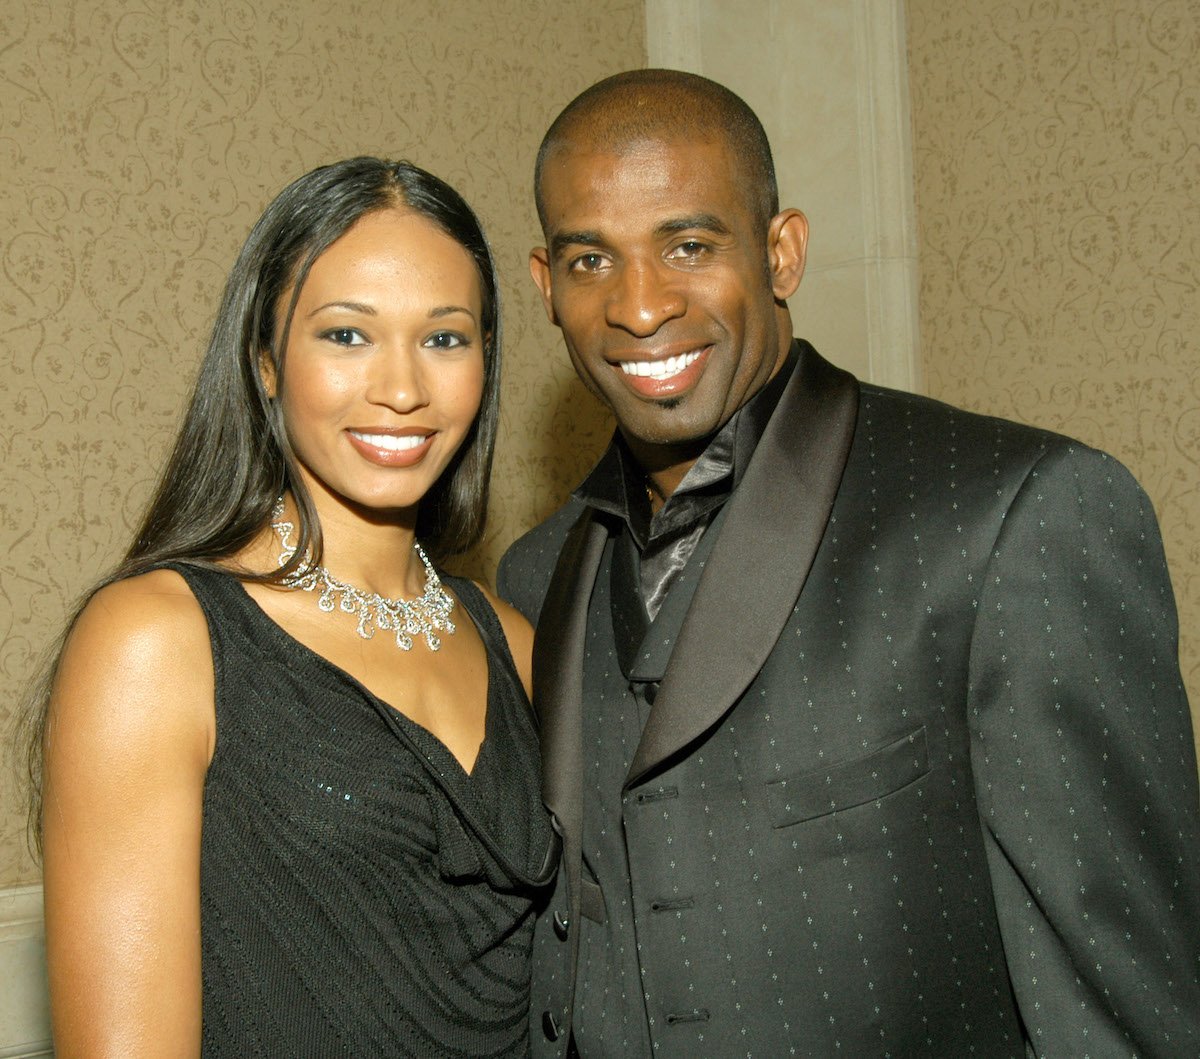 All 105+ Images pictures of deion sanders wife Latest